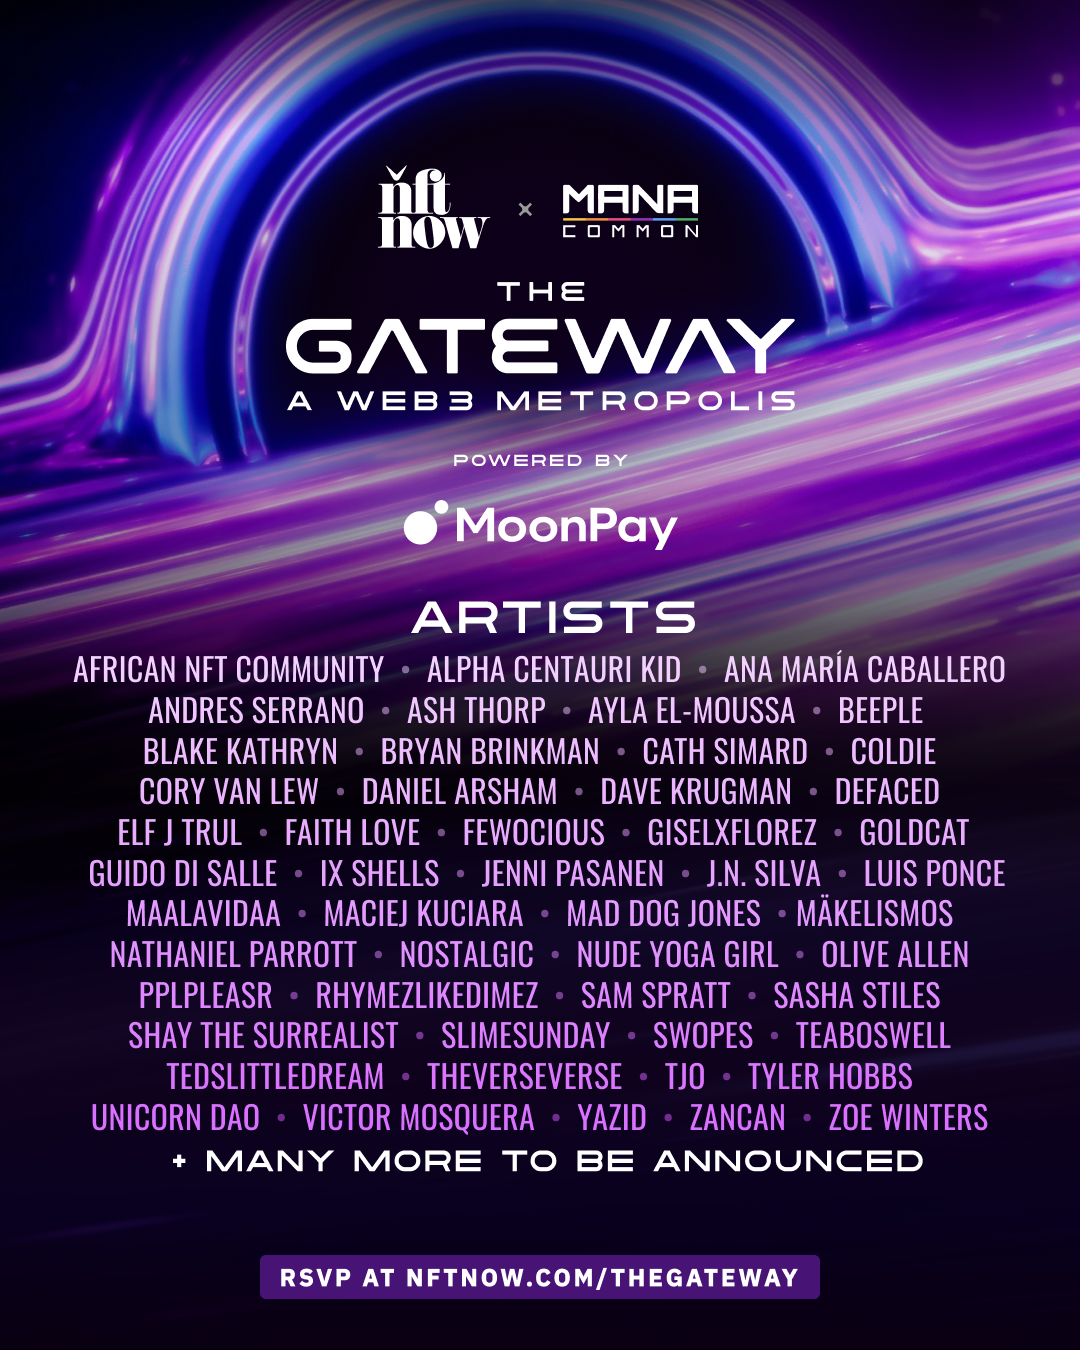 50+ Artists Announced for The Gateway 2022